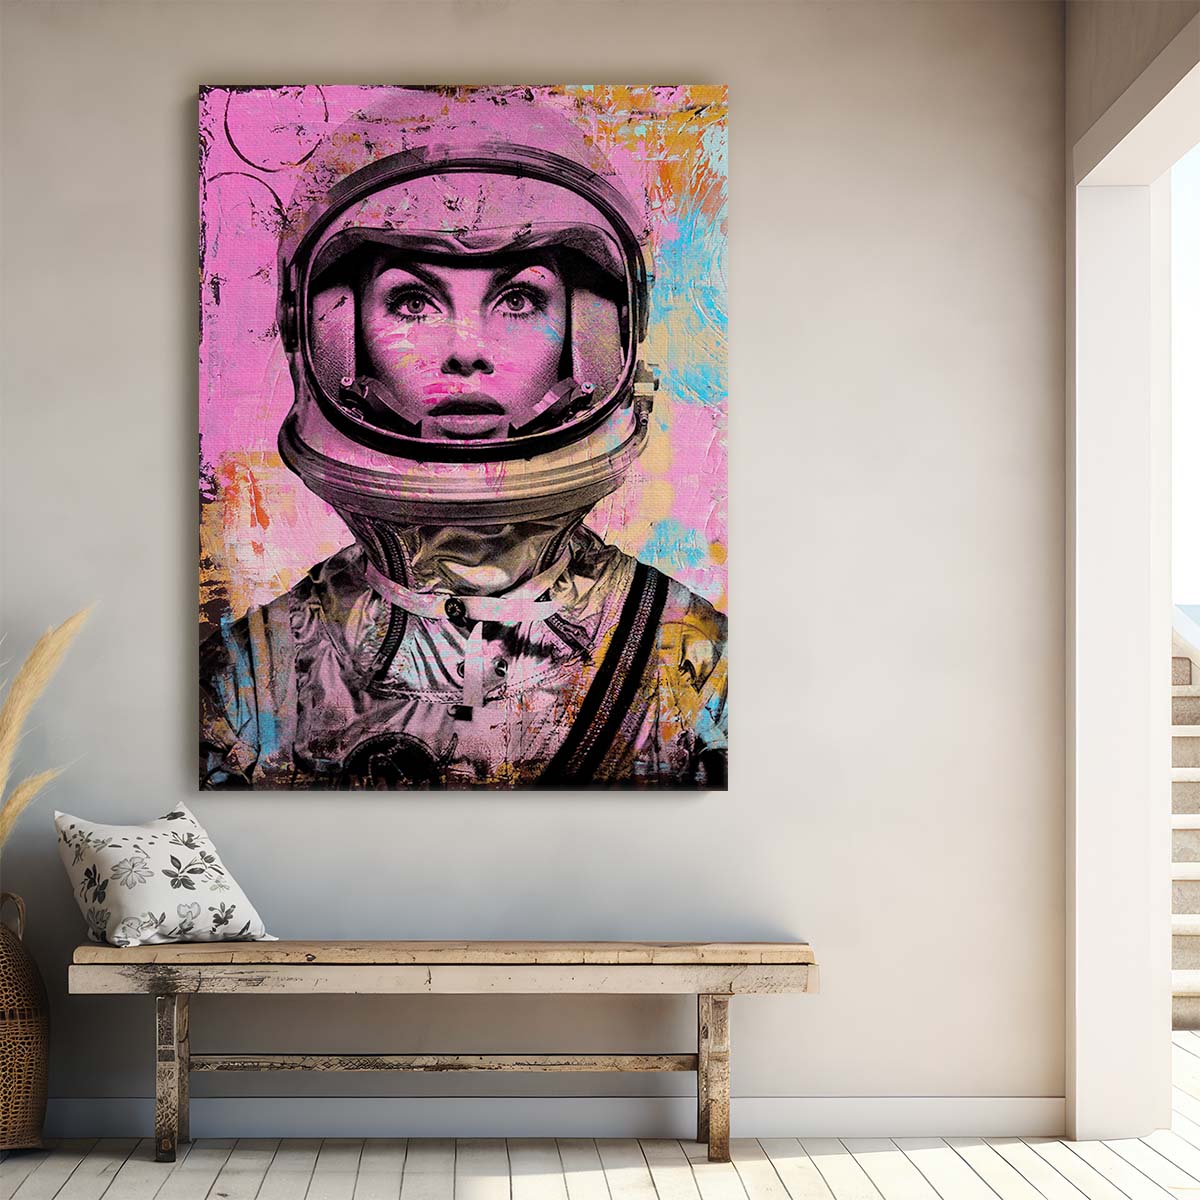 Jeannie Shrimpton Girl Astronaut 60s Space Age Circles Graffiti Wall Art by Luxuriance Designs. Made in USA.